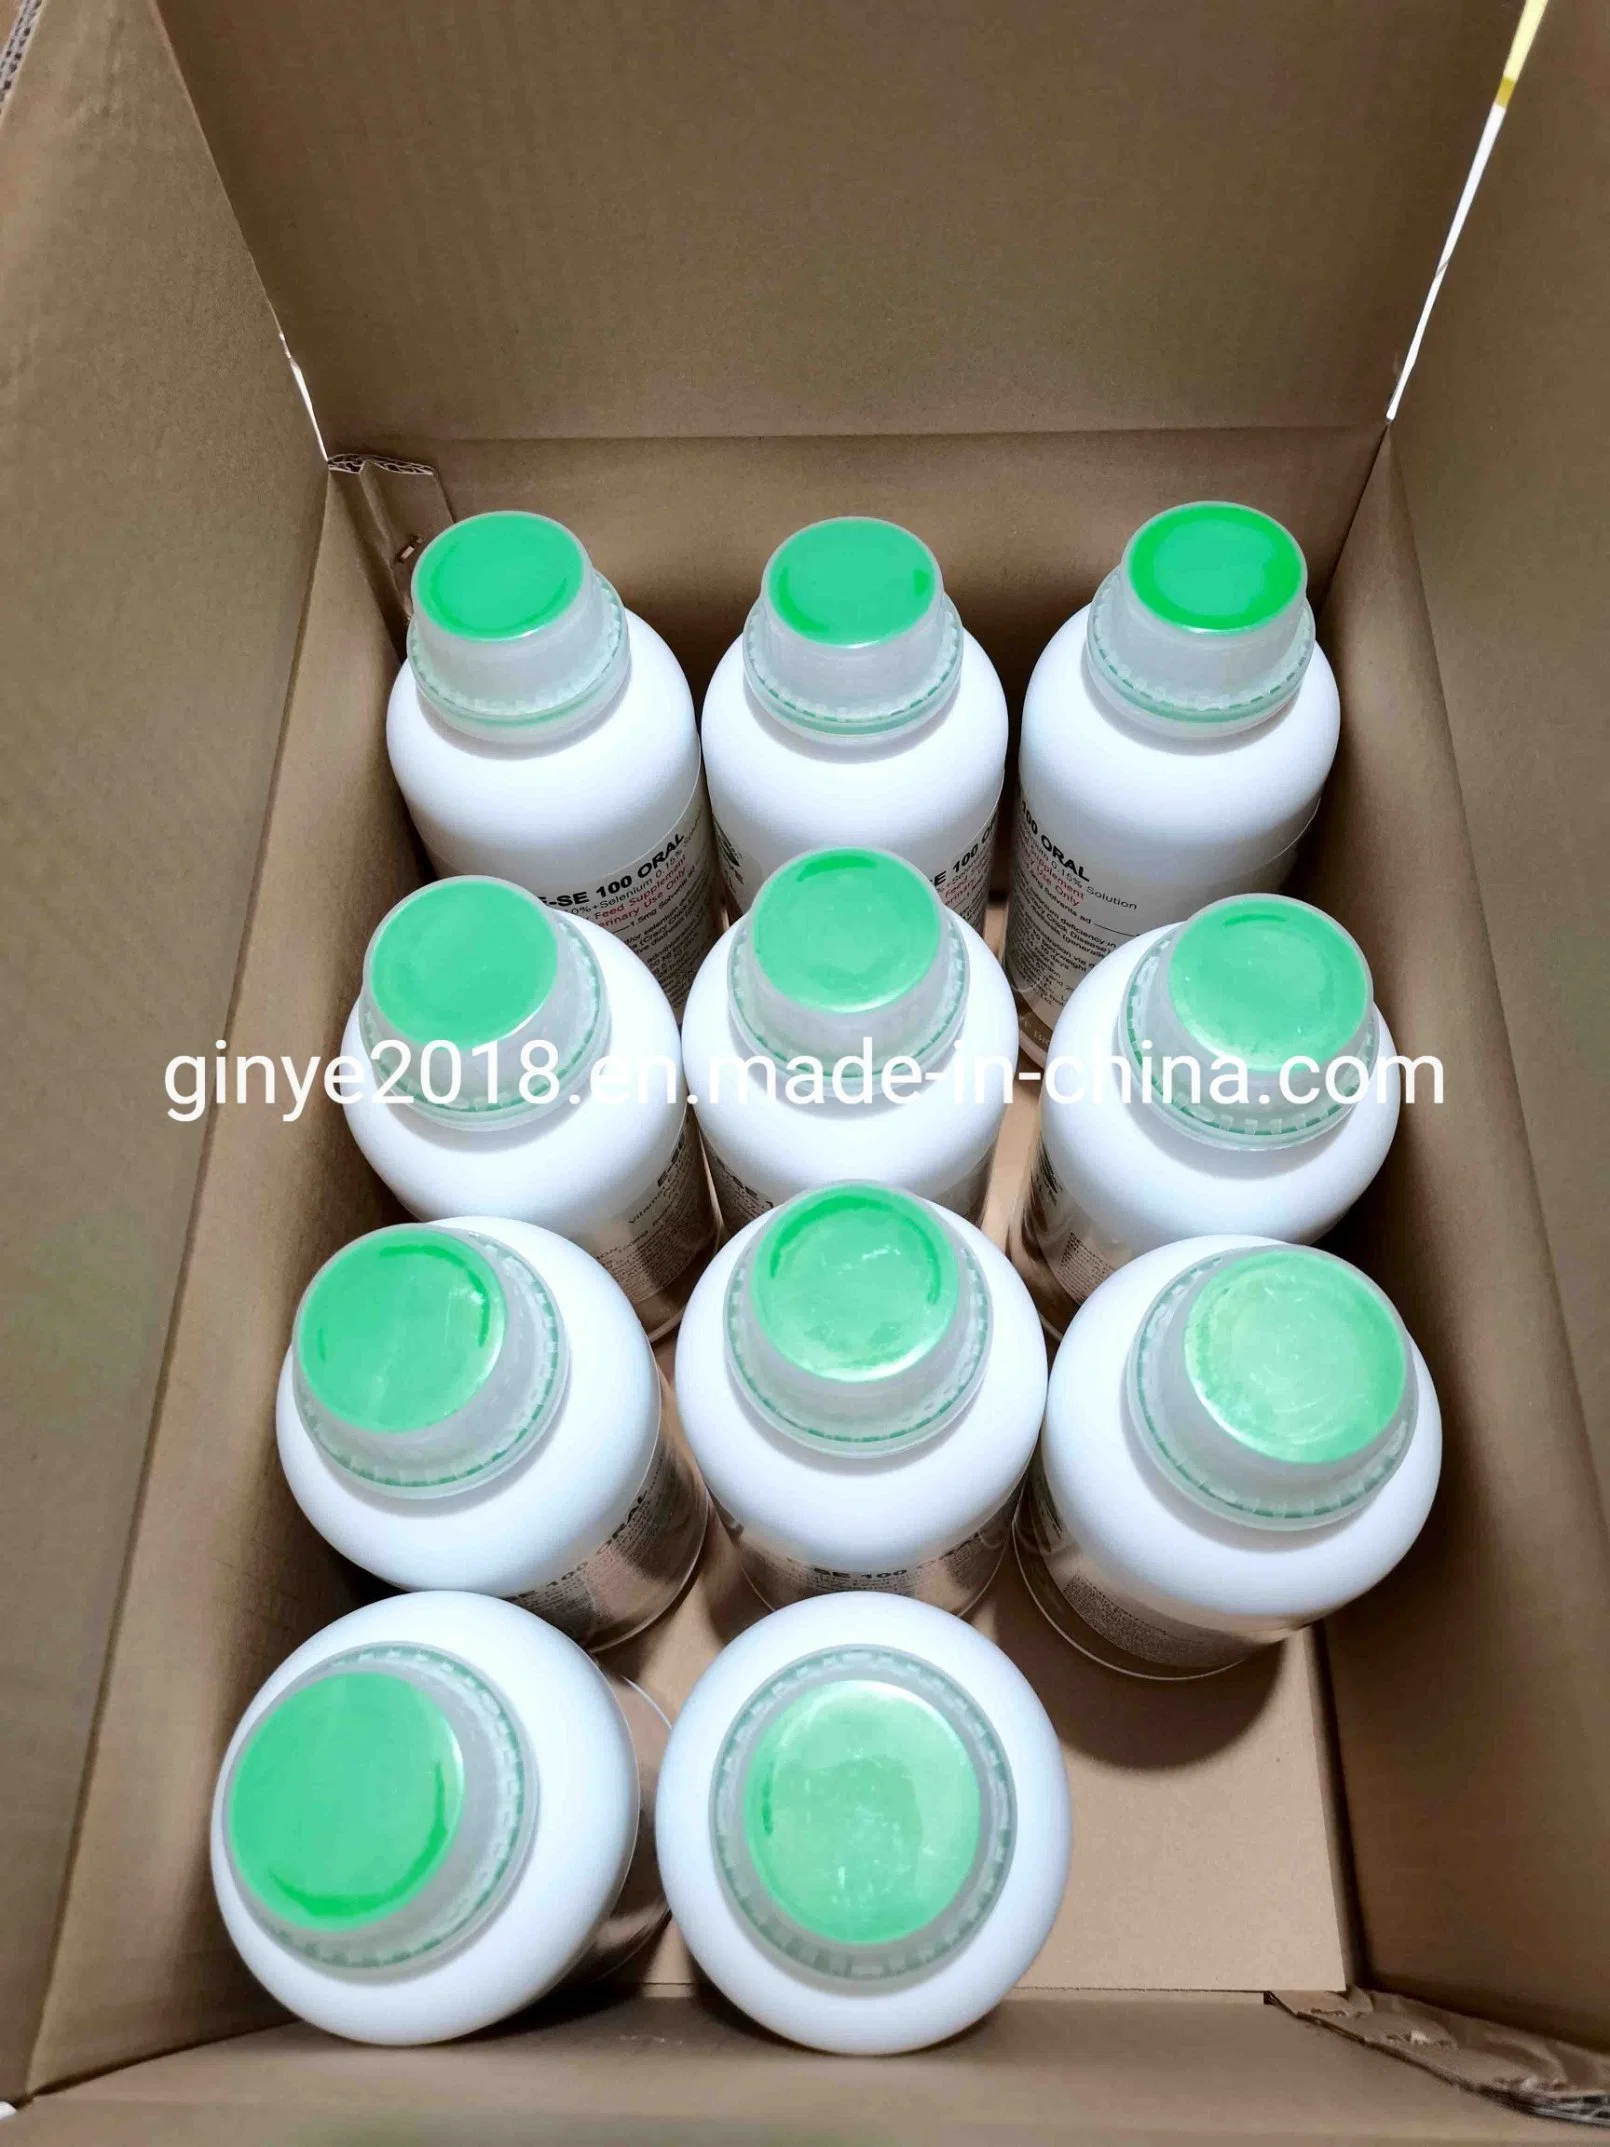 Veterinary Medicine 10%, 20%, 30% Florfenicol Oral Solution for Poultry